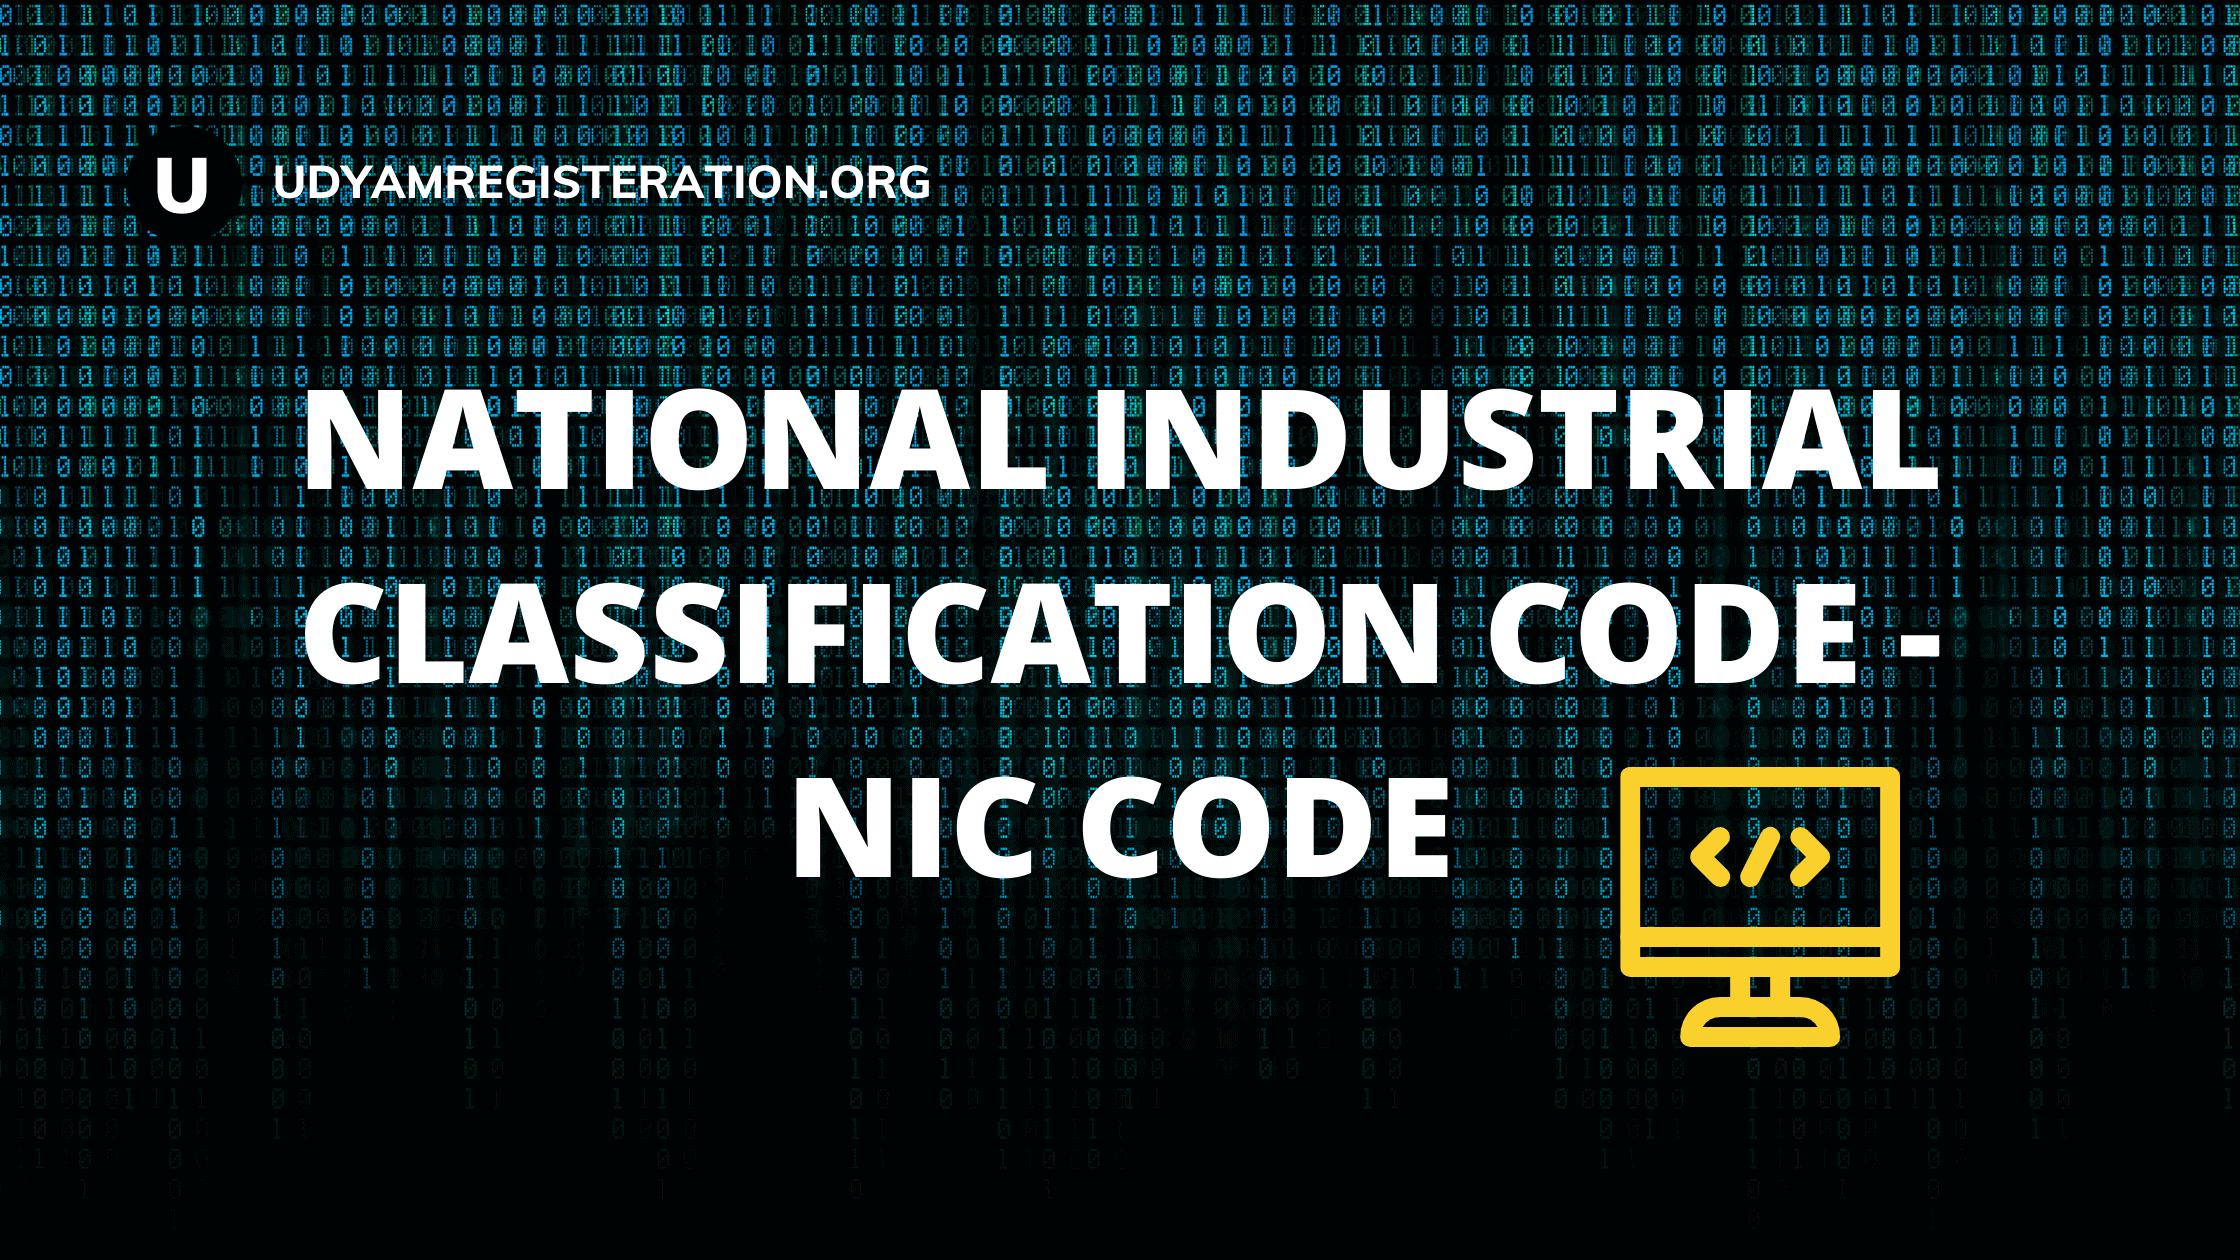 National Industrial Classification Code - NIC Code